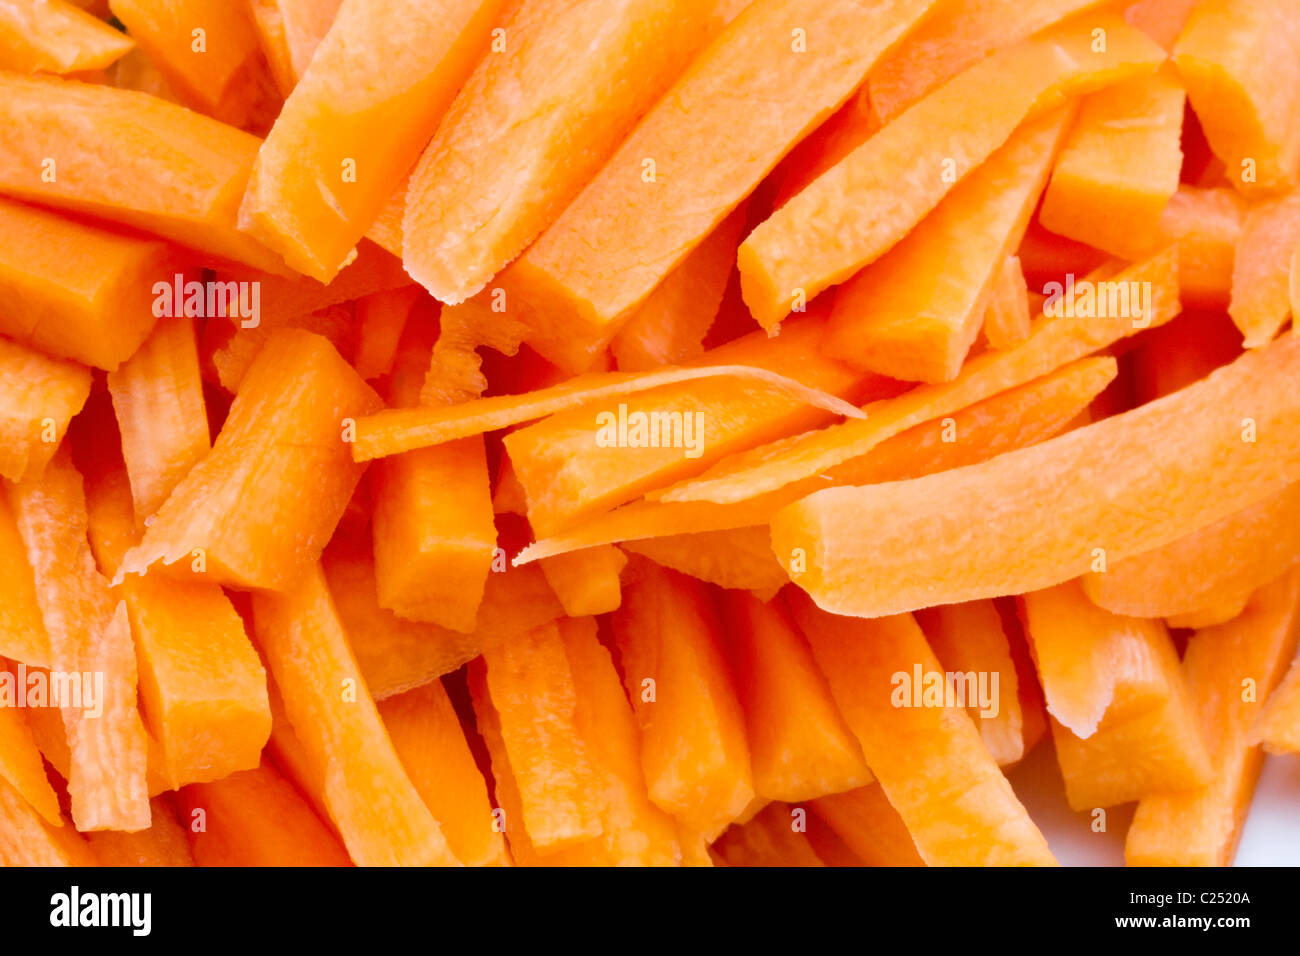 Background of fresh sliced carrot closeup Stock Photo